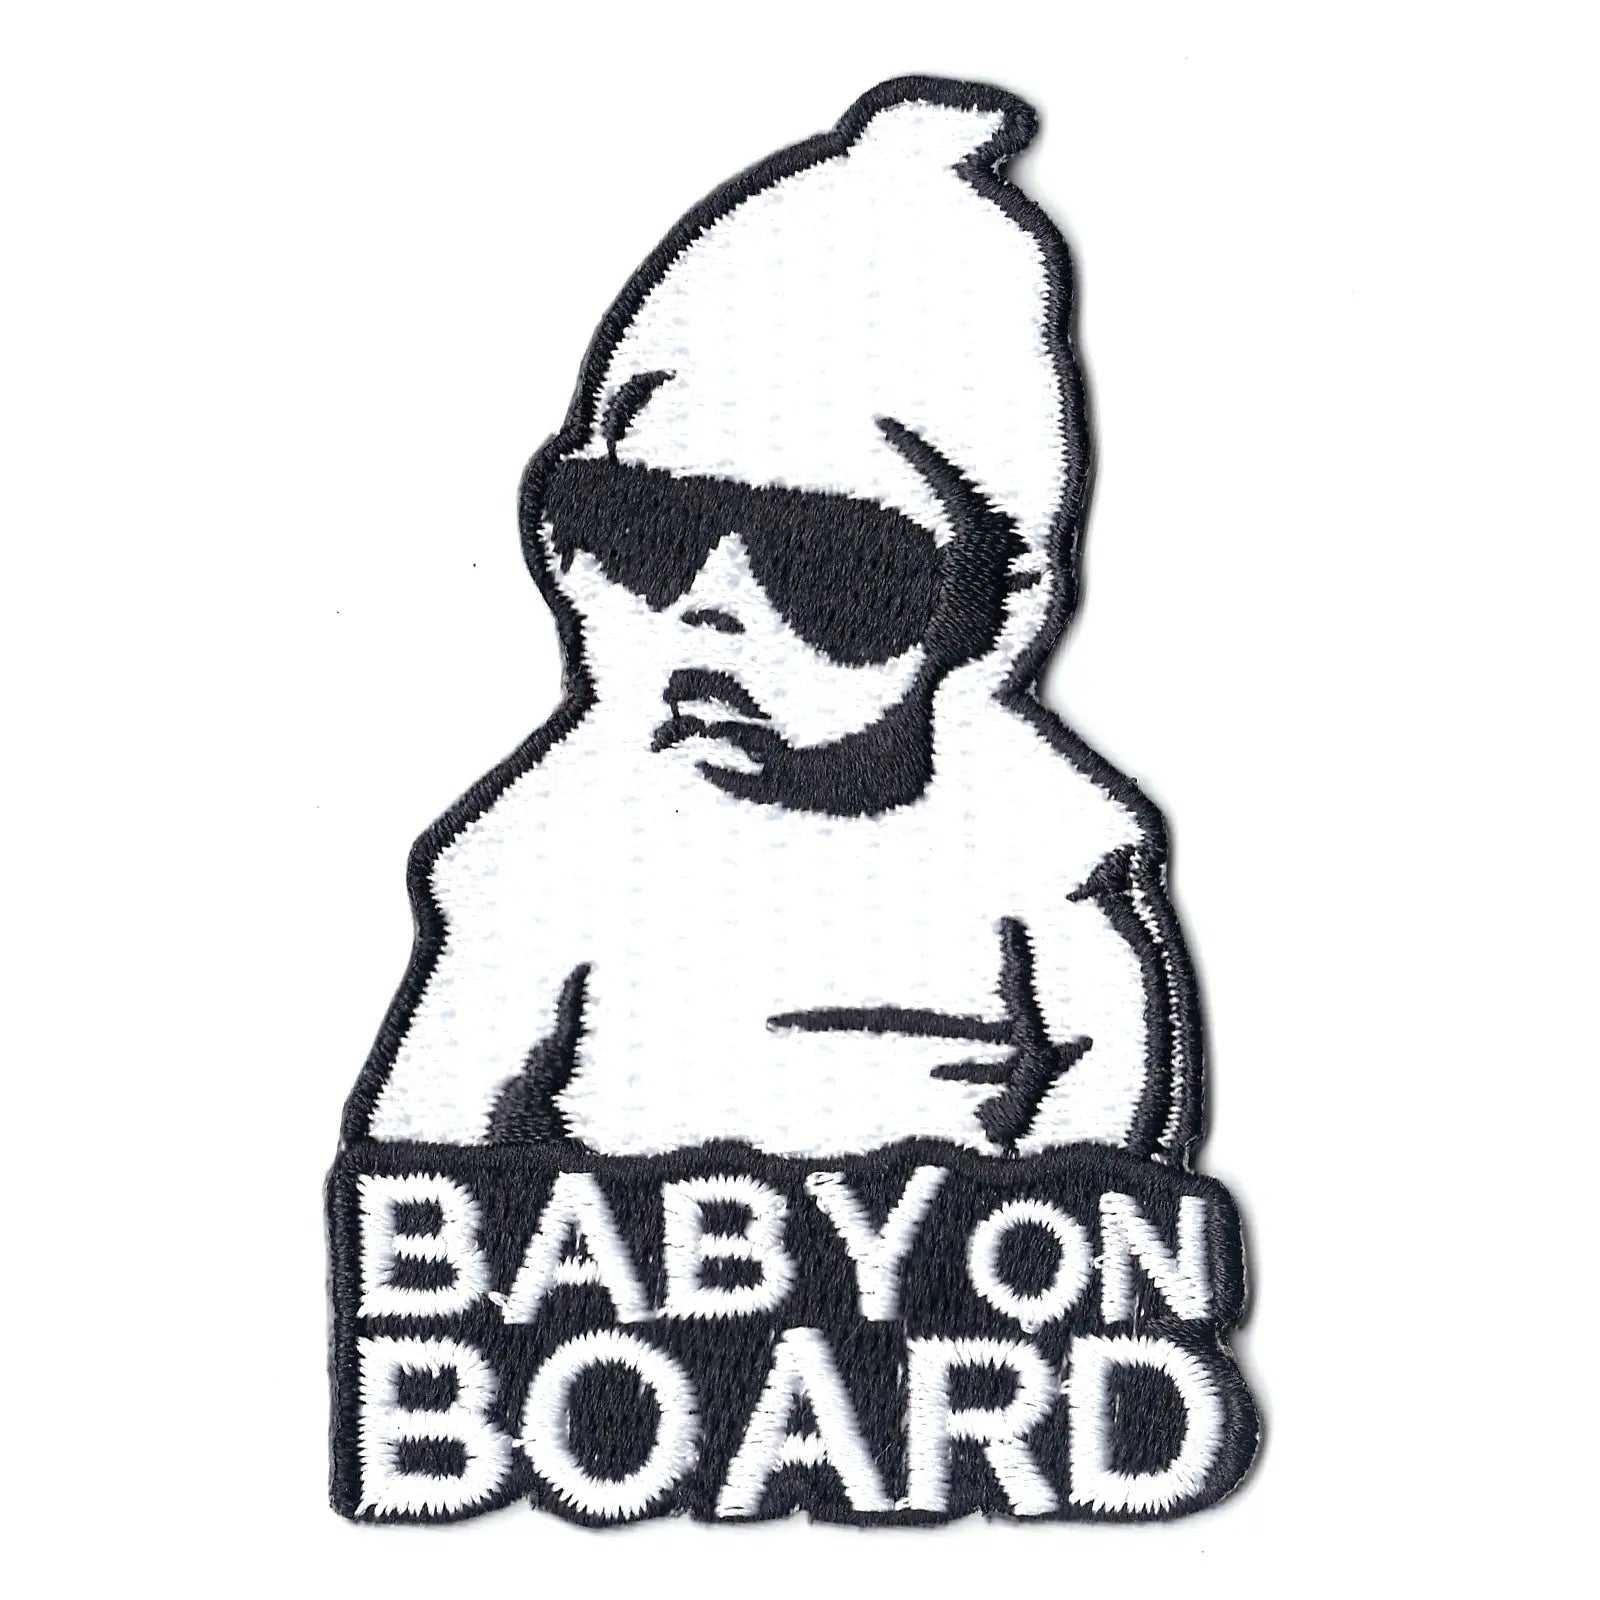 Baby On Board Iron On Patch 